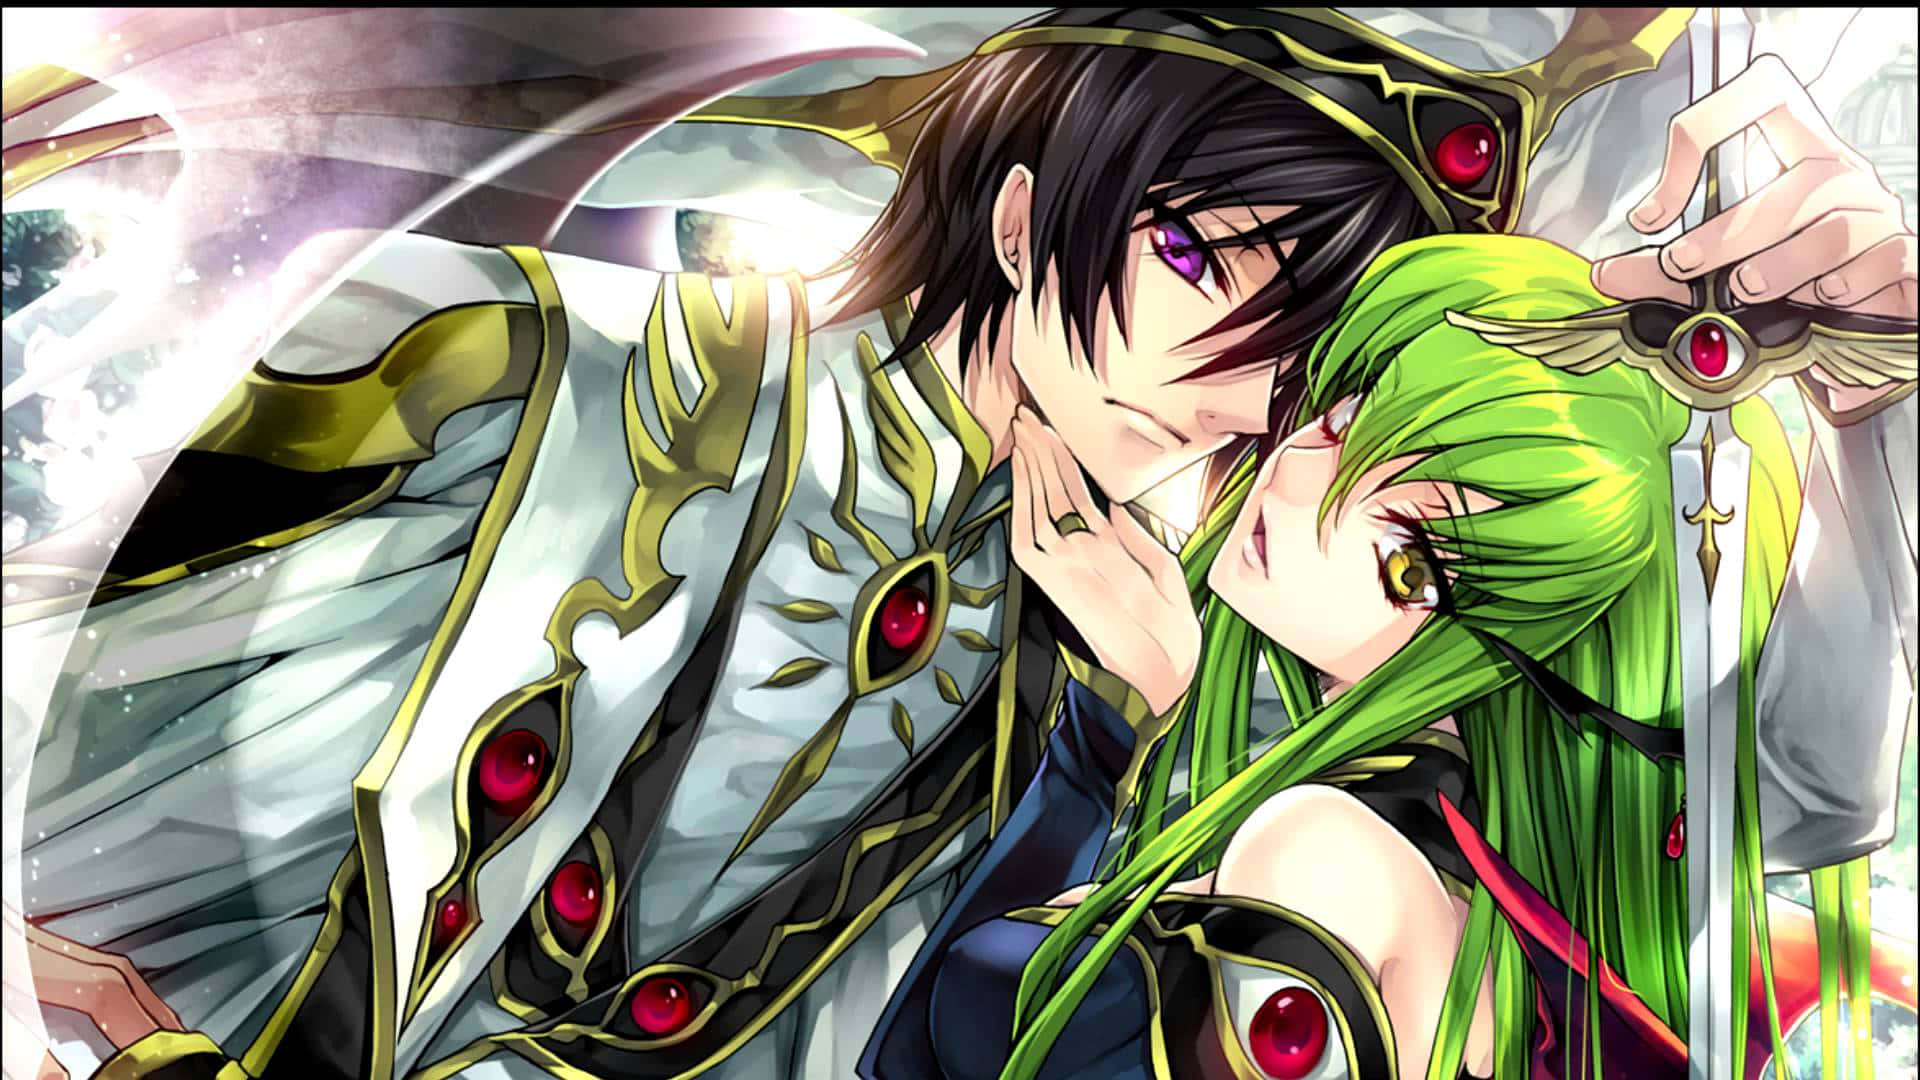 Discover the mysteries of power and destiny with Code Geass